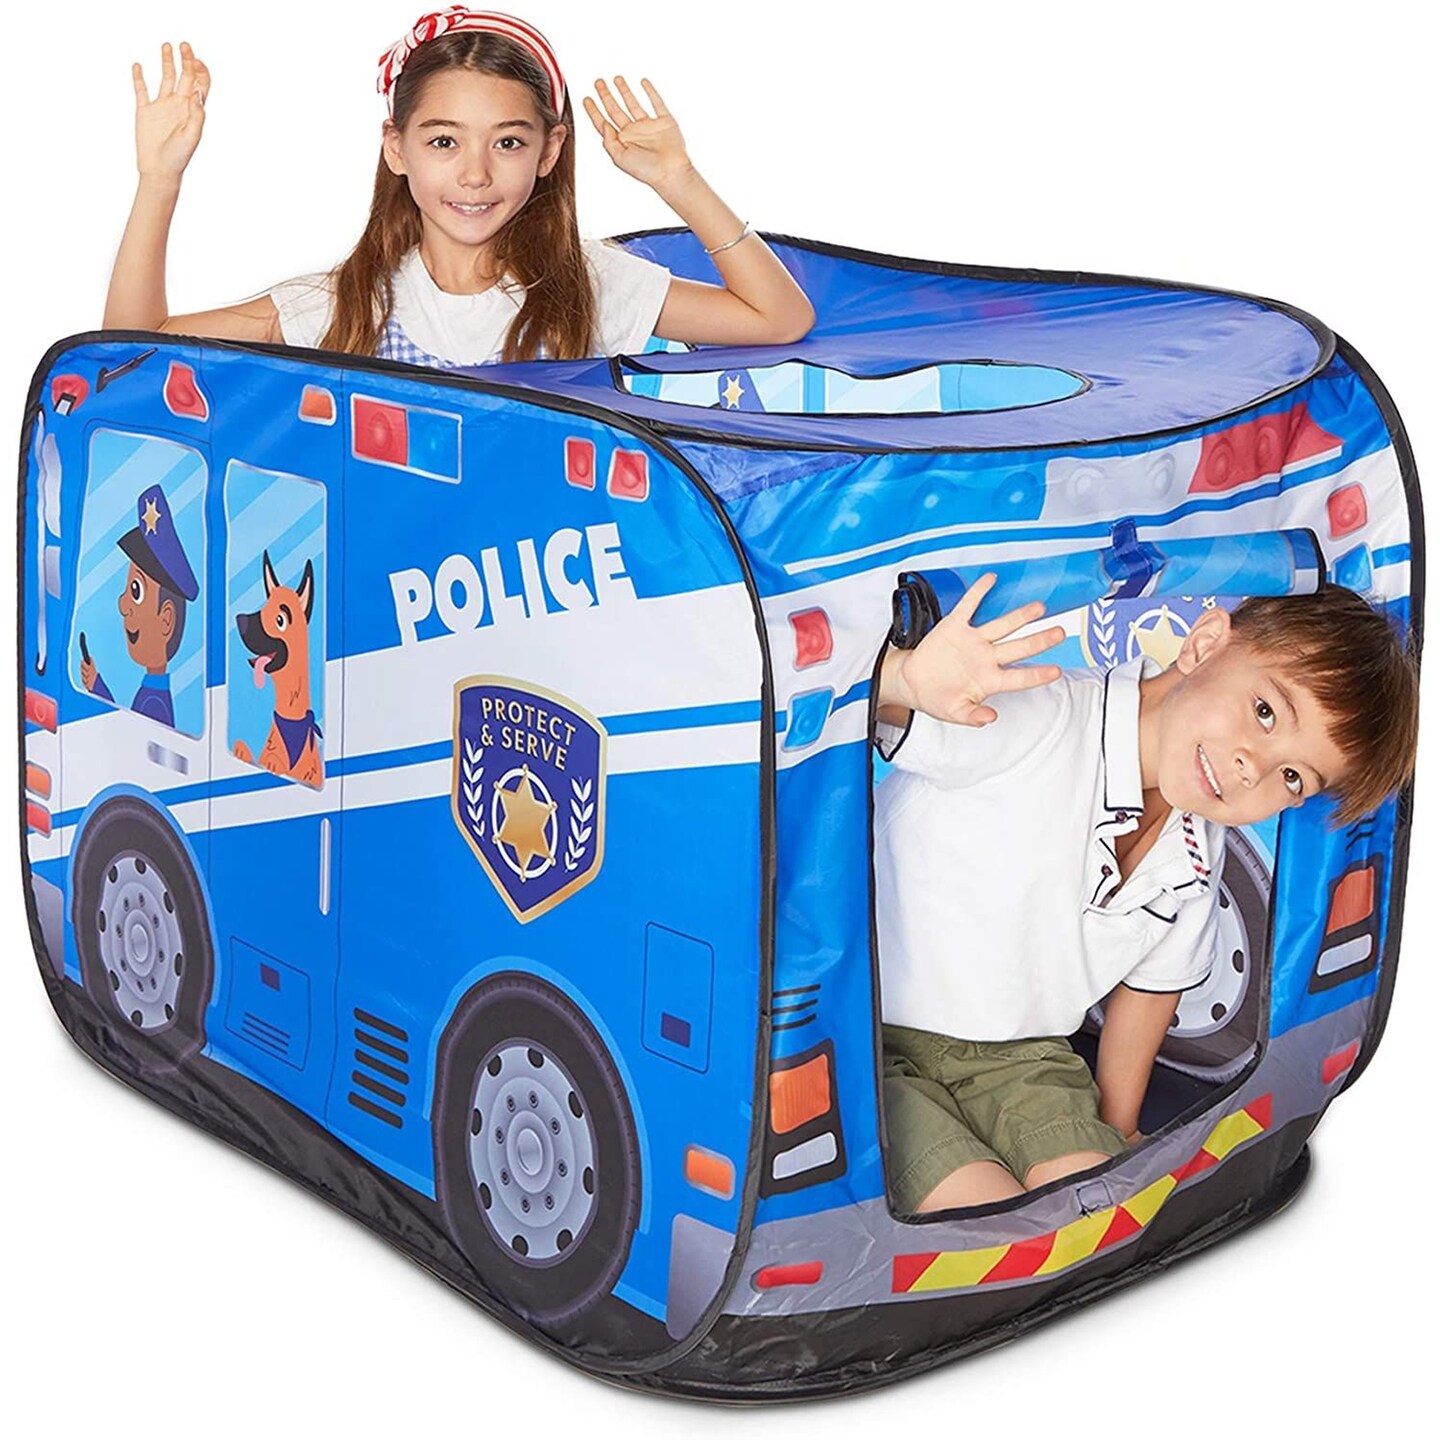 Kids Pop up Play Tent Foldable into Carrying Bag, Police Car Playhouse, 43 x 28 x 28 inches